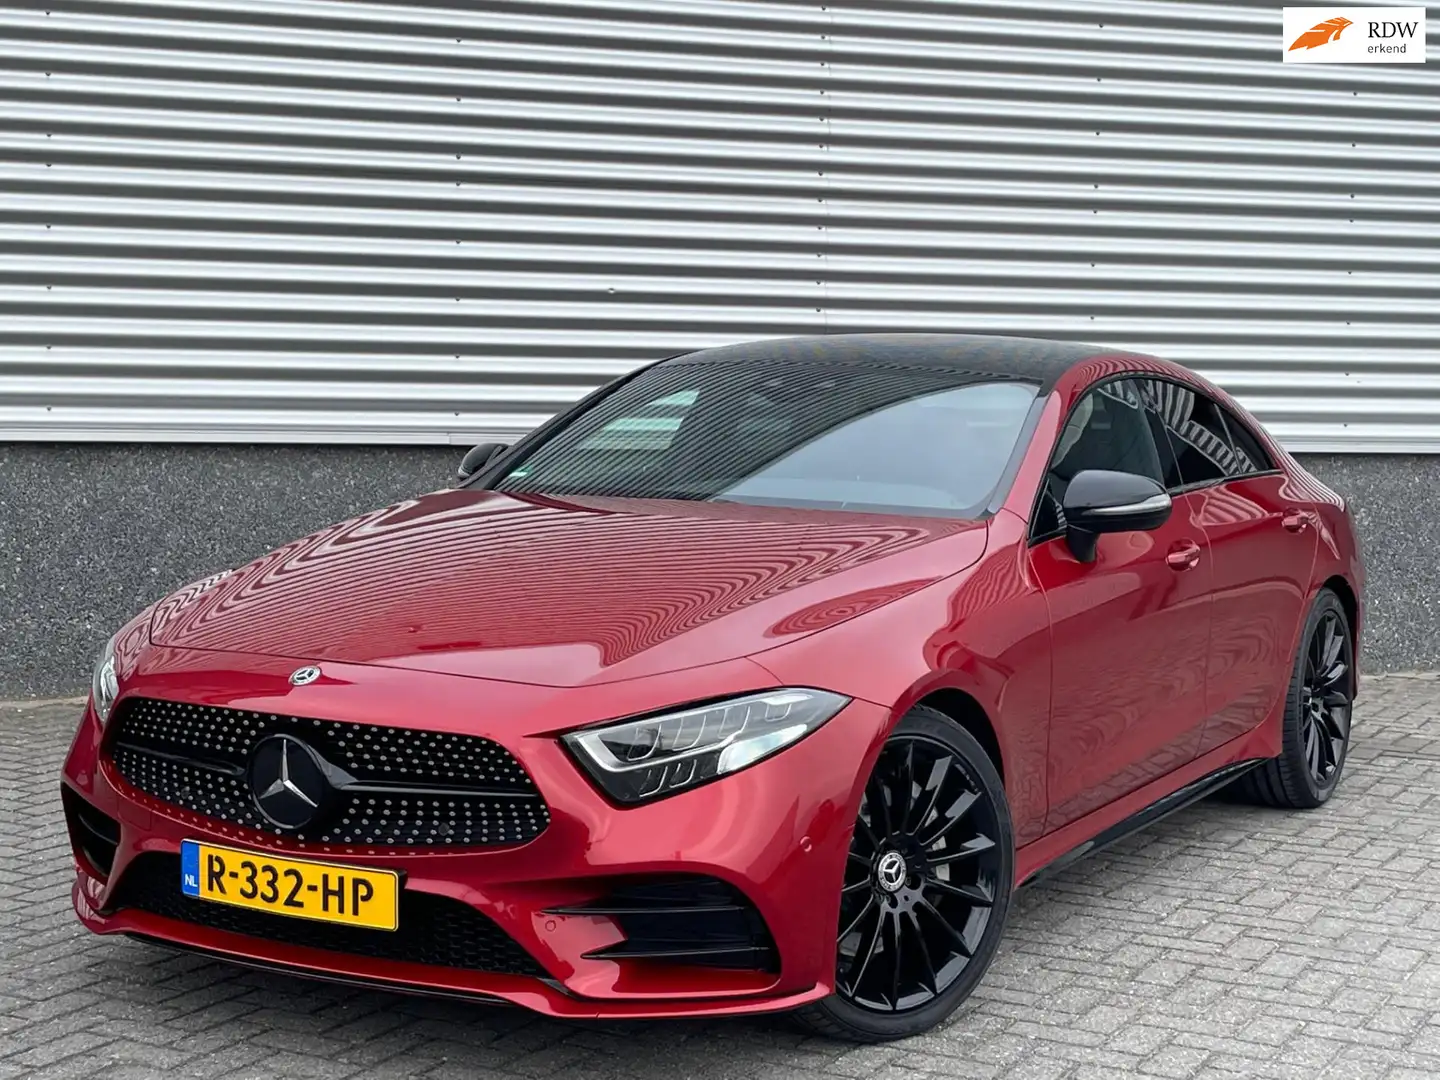 Mercedes-Benz CLS 400 d 4MATIC Amg Line Black Edition Rosso - 1